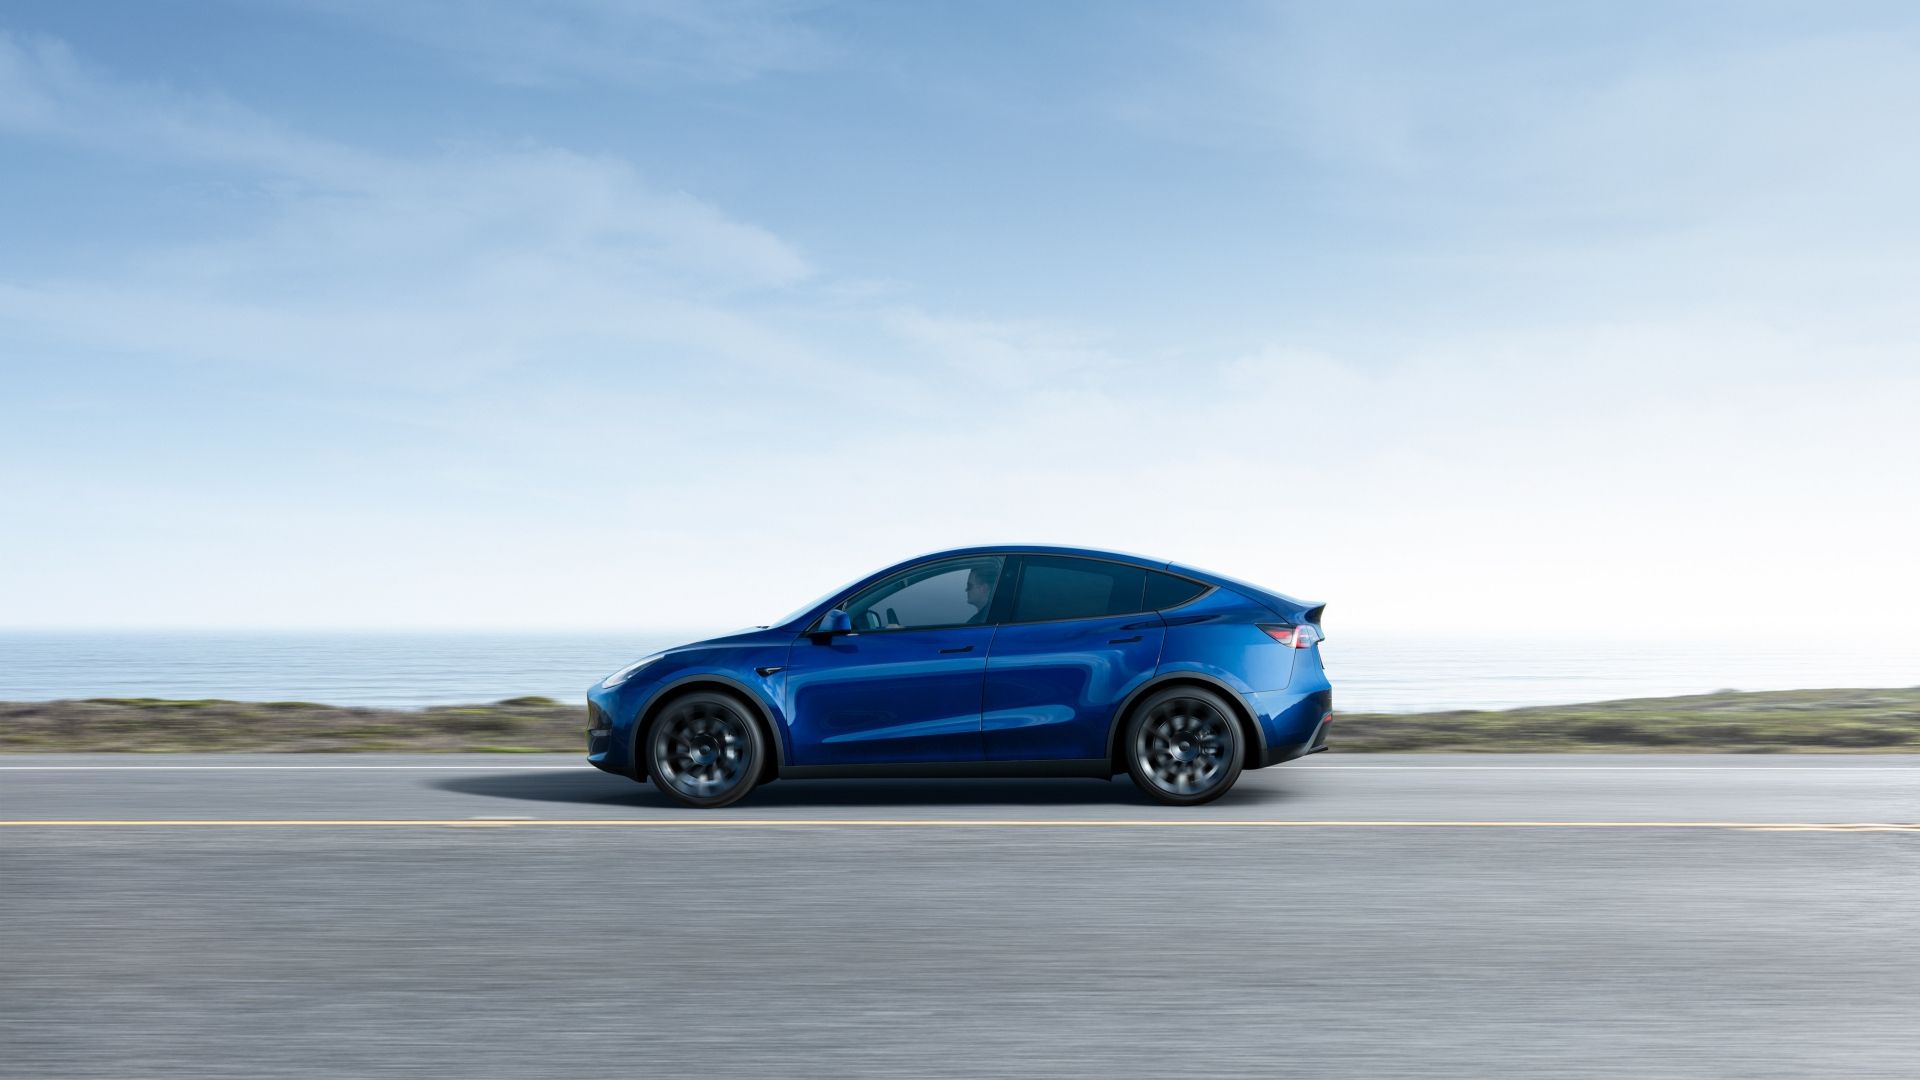 Used Tesla Model Y: How Much They Sell For In 2023-2024